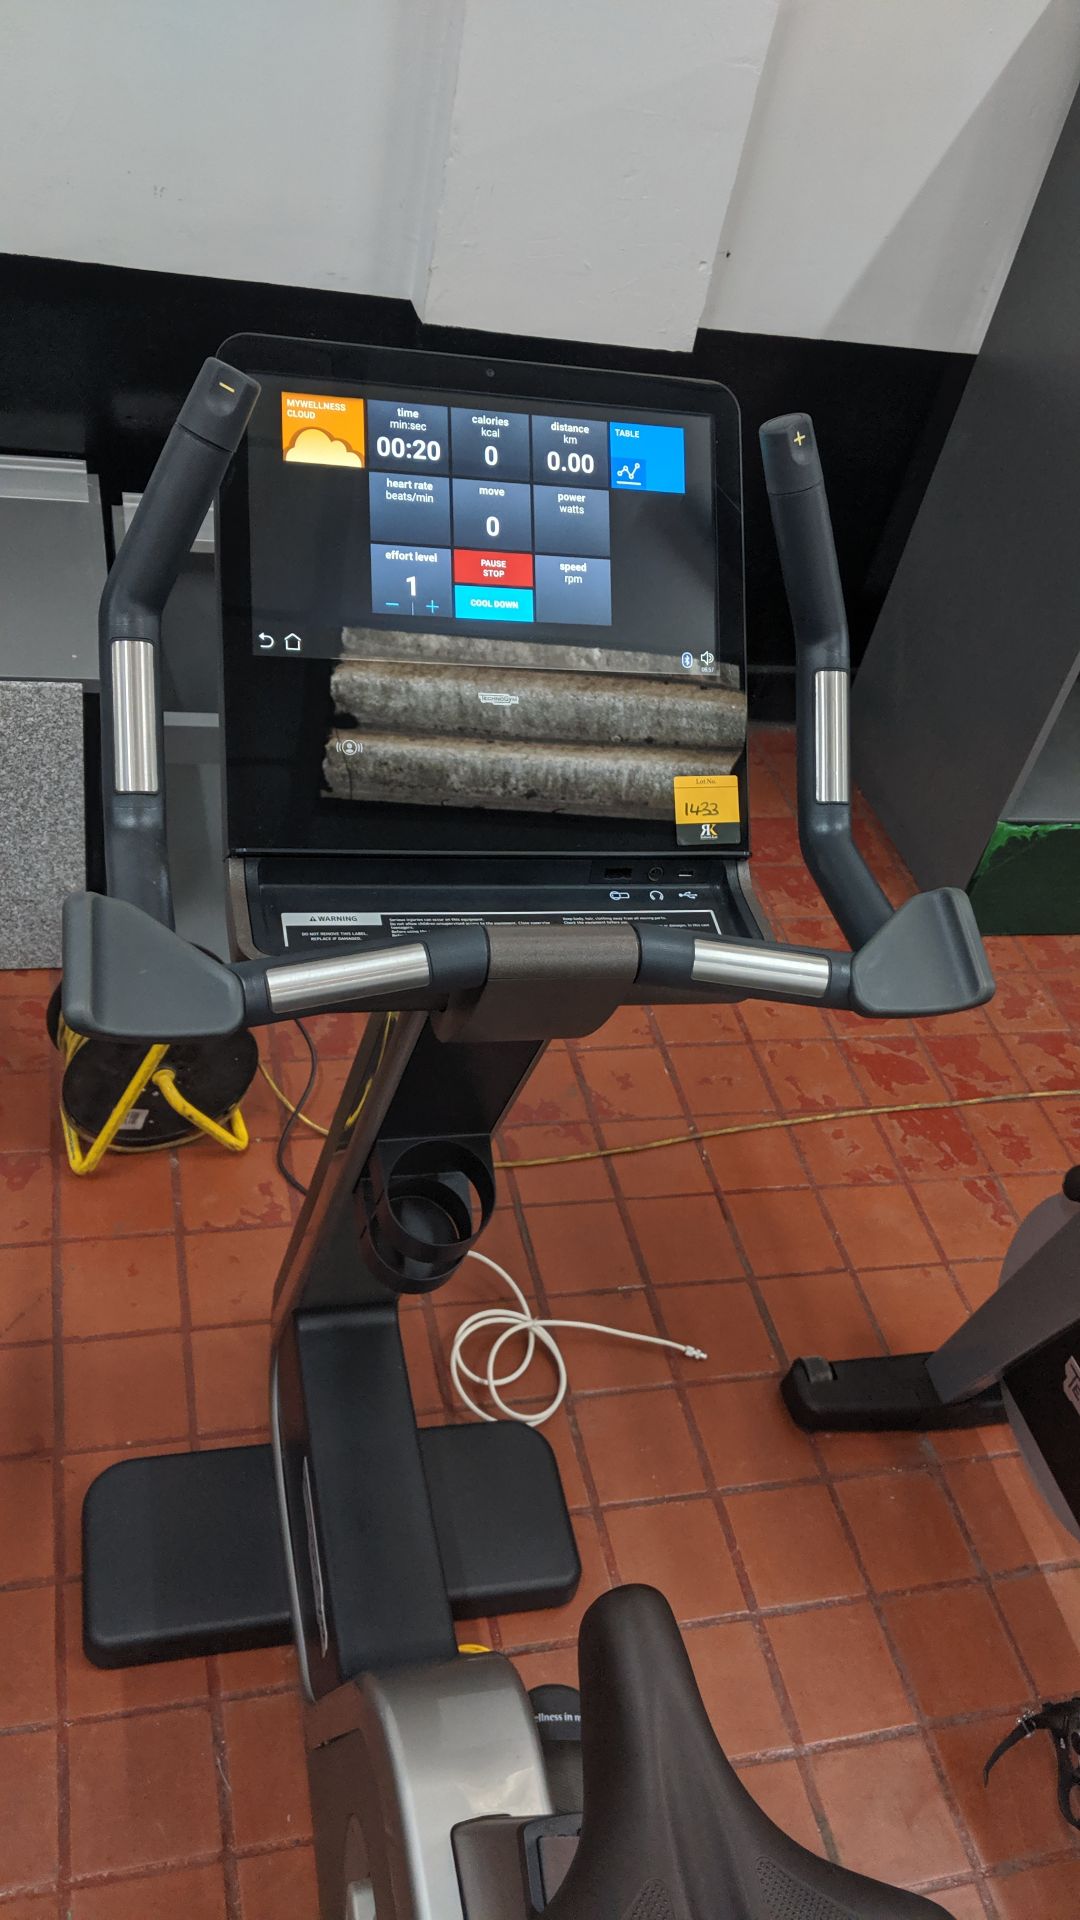 Technogym Artis exercise bike. Purchased new in 2016 - refurbished/recommissioned by Technogym - - Image 13 of 15